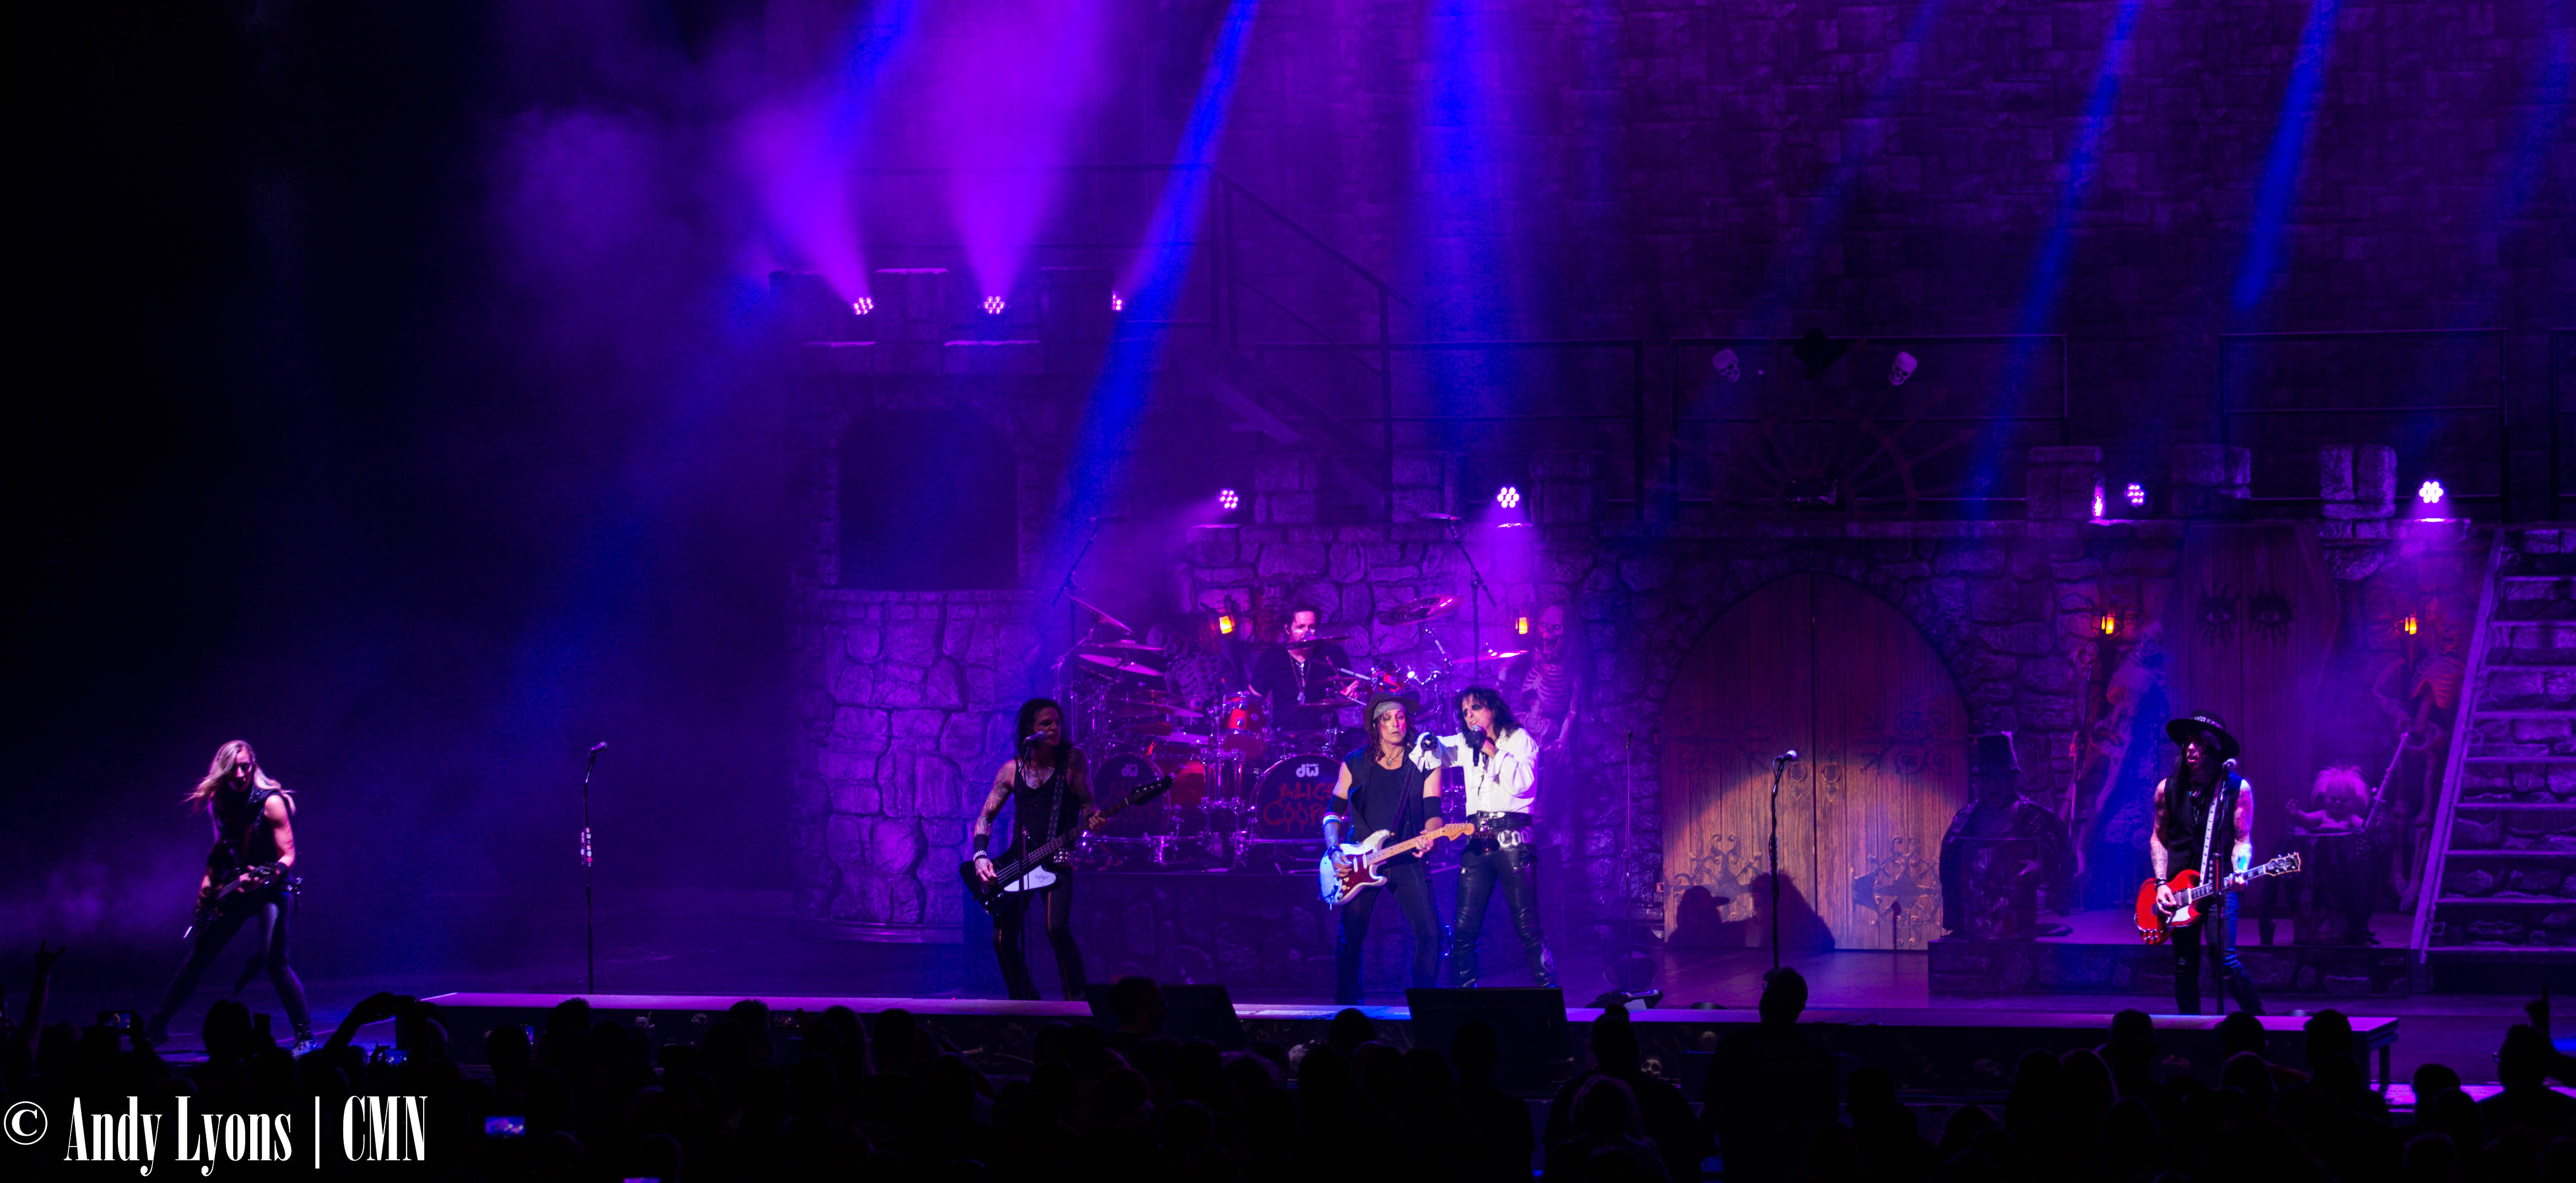 Alice Cooper, Halestorm bring generations of fans and music together at Starlight Theatre